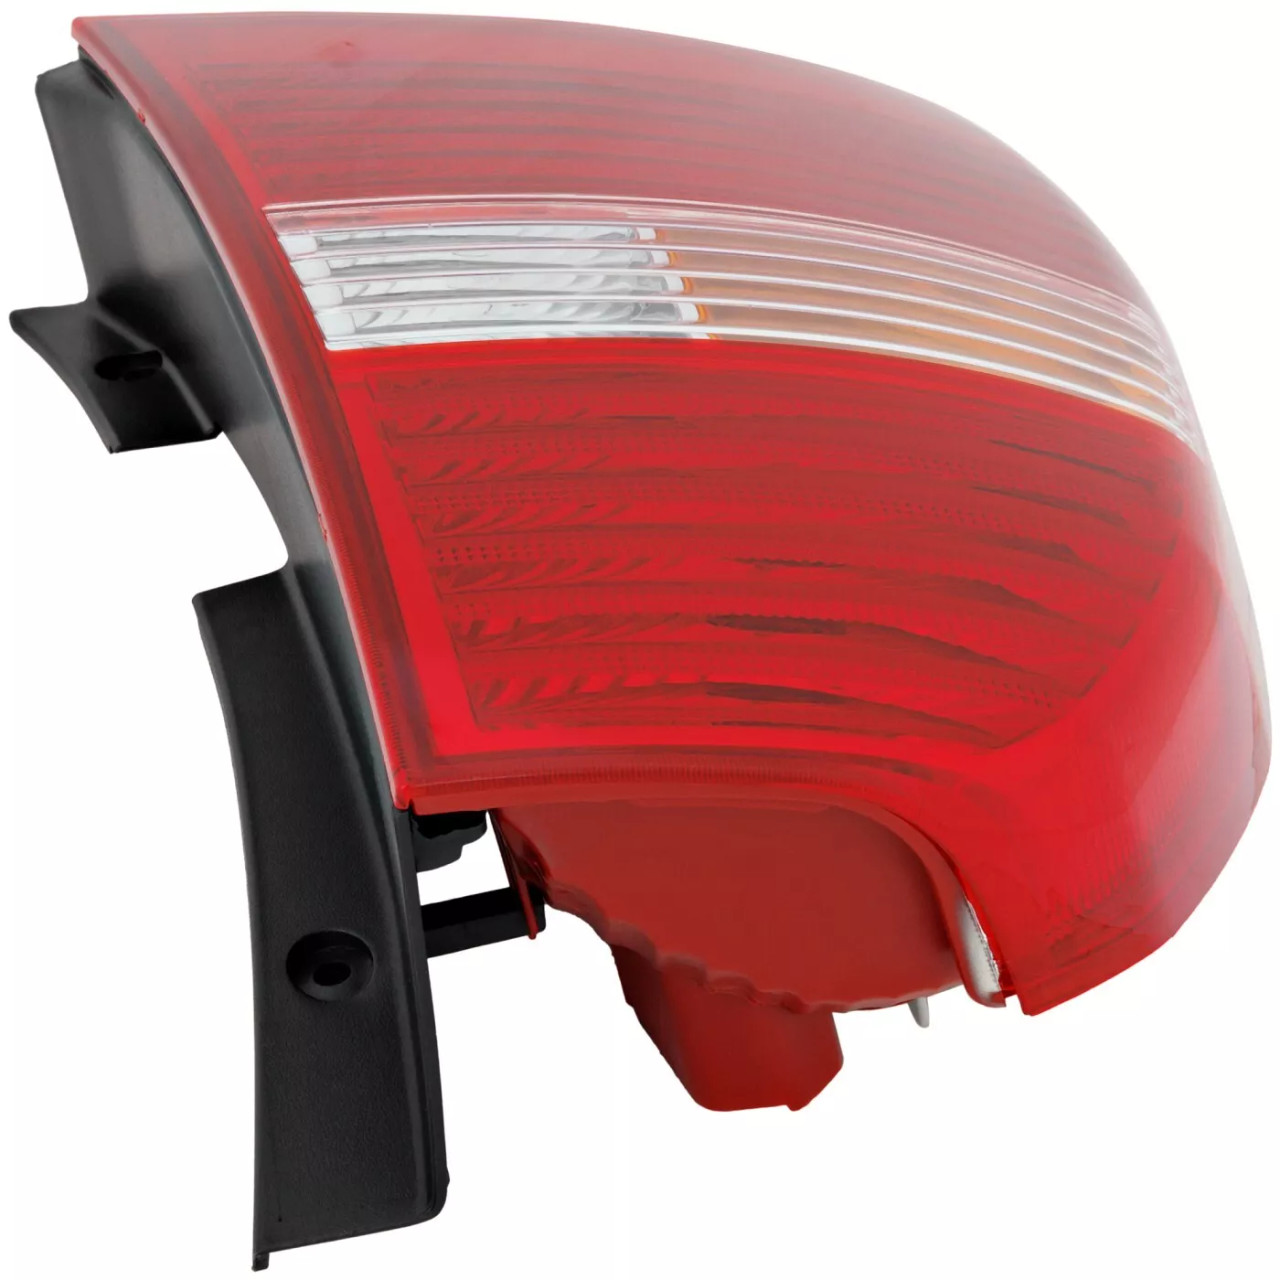 Halogen Tail Light For 2005-10 Kia Sportage Type 1 Left Ambr/Clr/Red w/Bulb CAPA